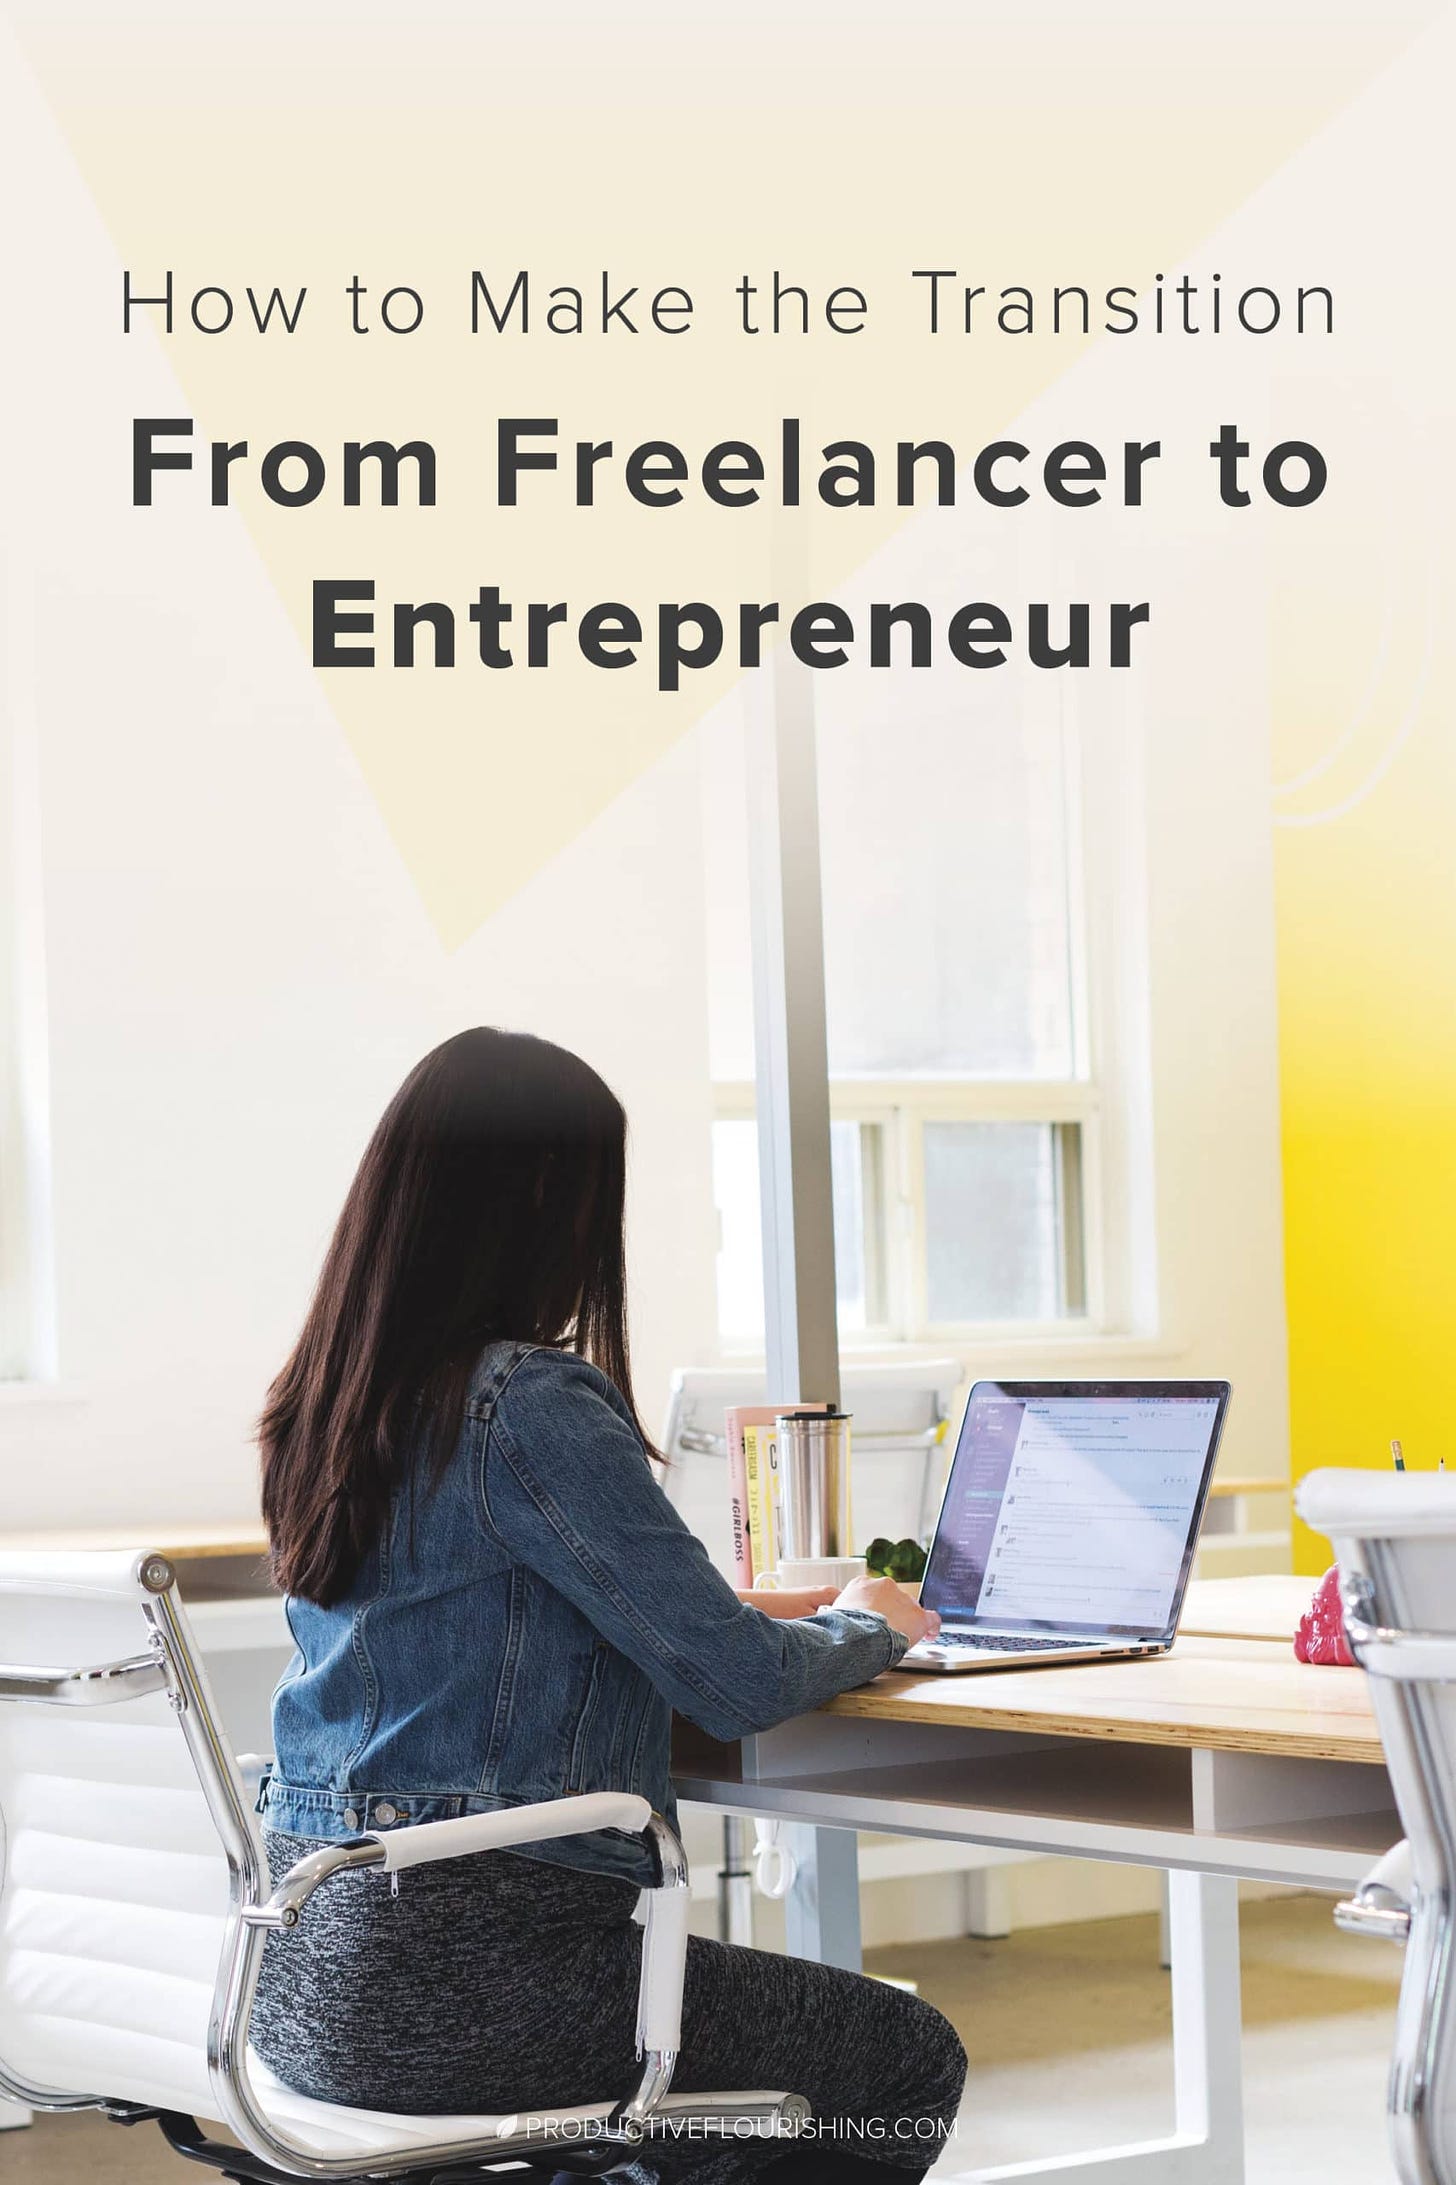 How to Make the Transition From Freelancer to Entrepreneur. See how I learned 4 ways to shift from being a freelancer to an entrepreneur. I learned how to become an entrepreneur when I changed my focus from working in my business to working on my business. Today, I spend most of my time creating partnerships and doing business development. #freelancing #entreprenuership #productiveflourishing